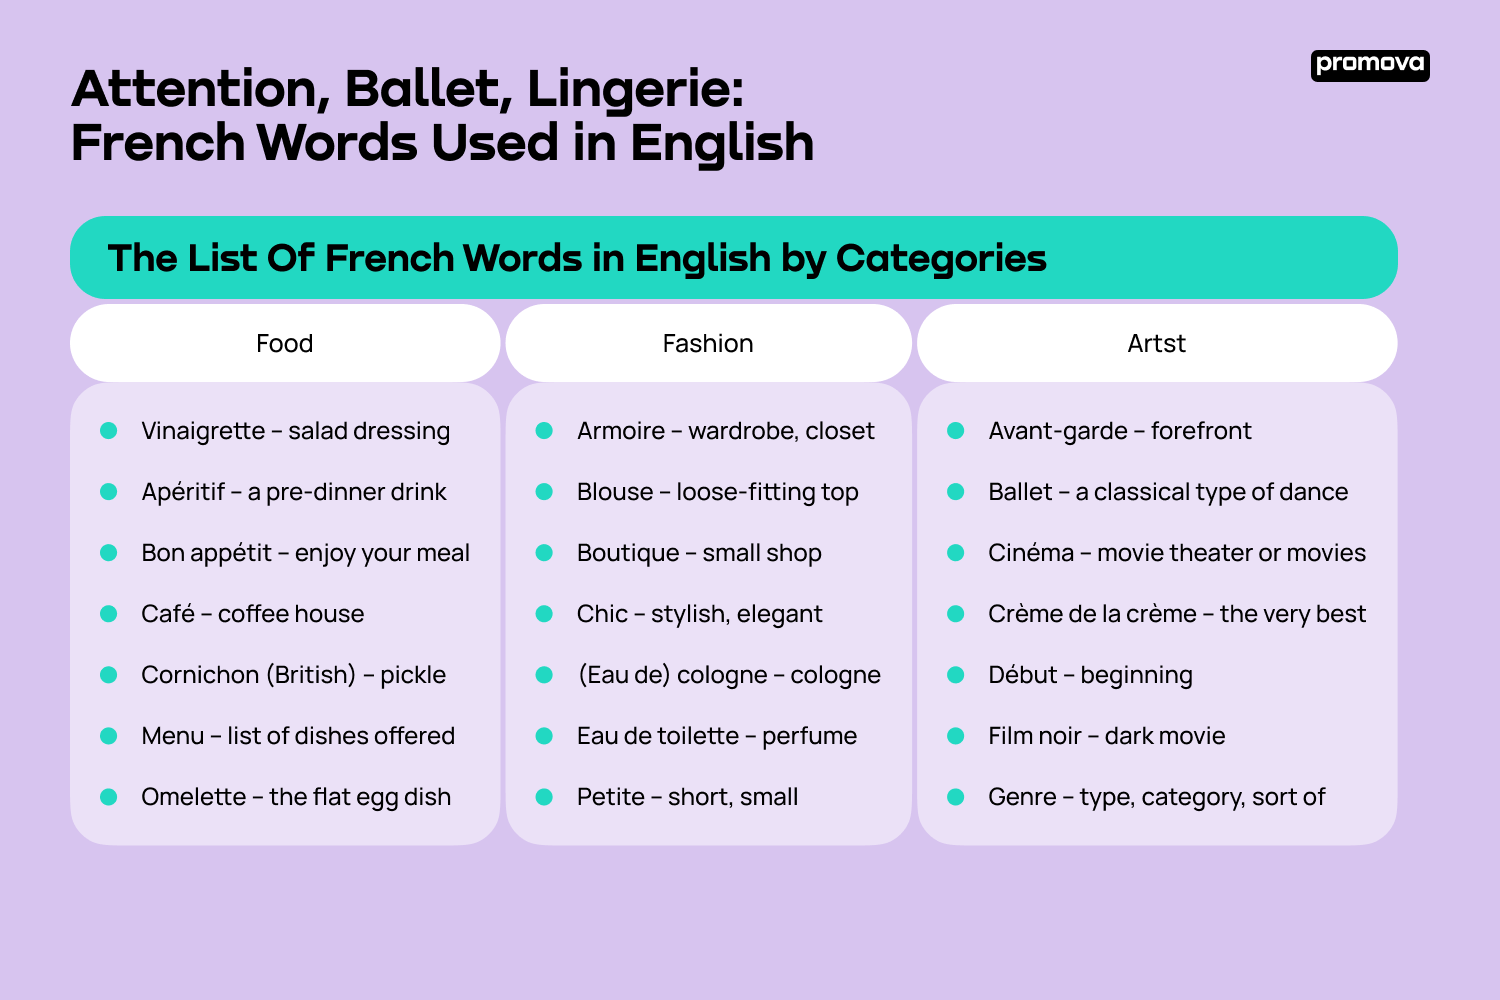 Exploring List Of French Words in English by Categories